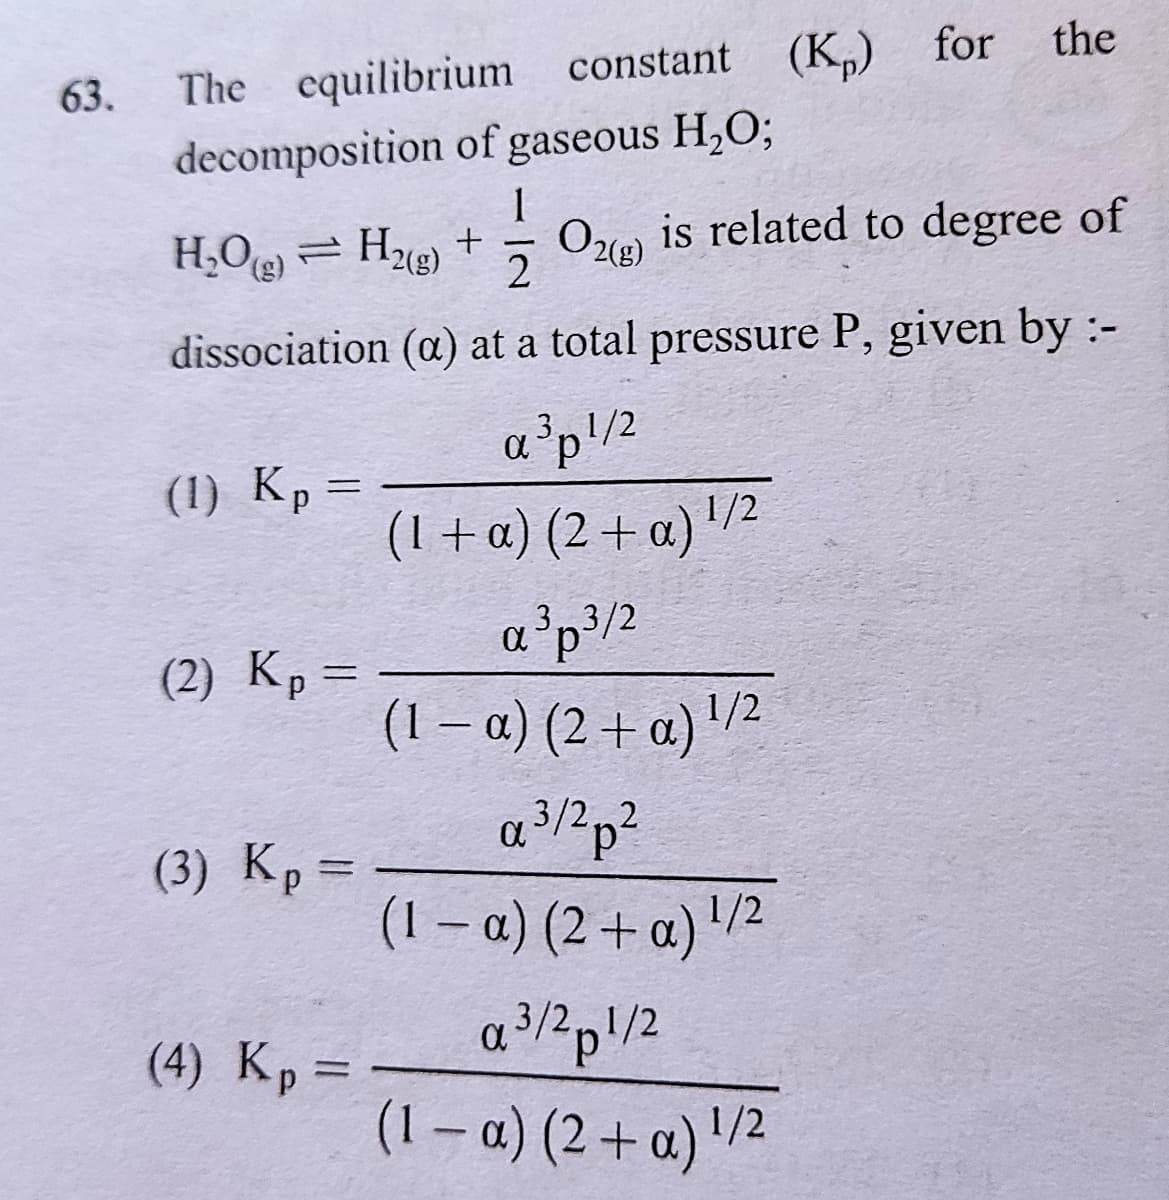 The equilibrium constant (K) for
decomposition of gaseous H,O;
the
63.
1
H;Oe = Hu) +
Oe is related to degree of
2
(),
dissociation (a) at a total pressure P, given by:-
a³p!/2
(1) Kp =
(1 +a) (2 + a) '/²
%3D
3/2
(2) Кр -
(1 – a) (2 + a) '/2
3/2,2
(3) Kp=
(1 – a) (2 + a) '/²
(4) Kp =
a?pl/2
3/2,1/2
(1 – a) (2 + a) '/2
